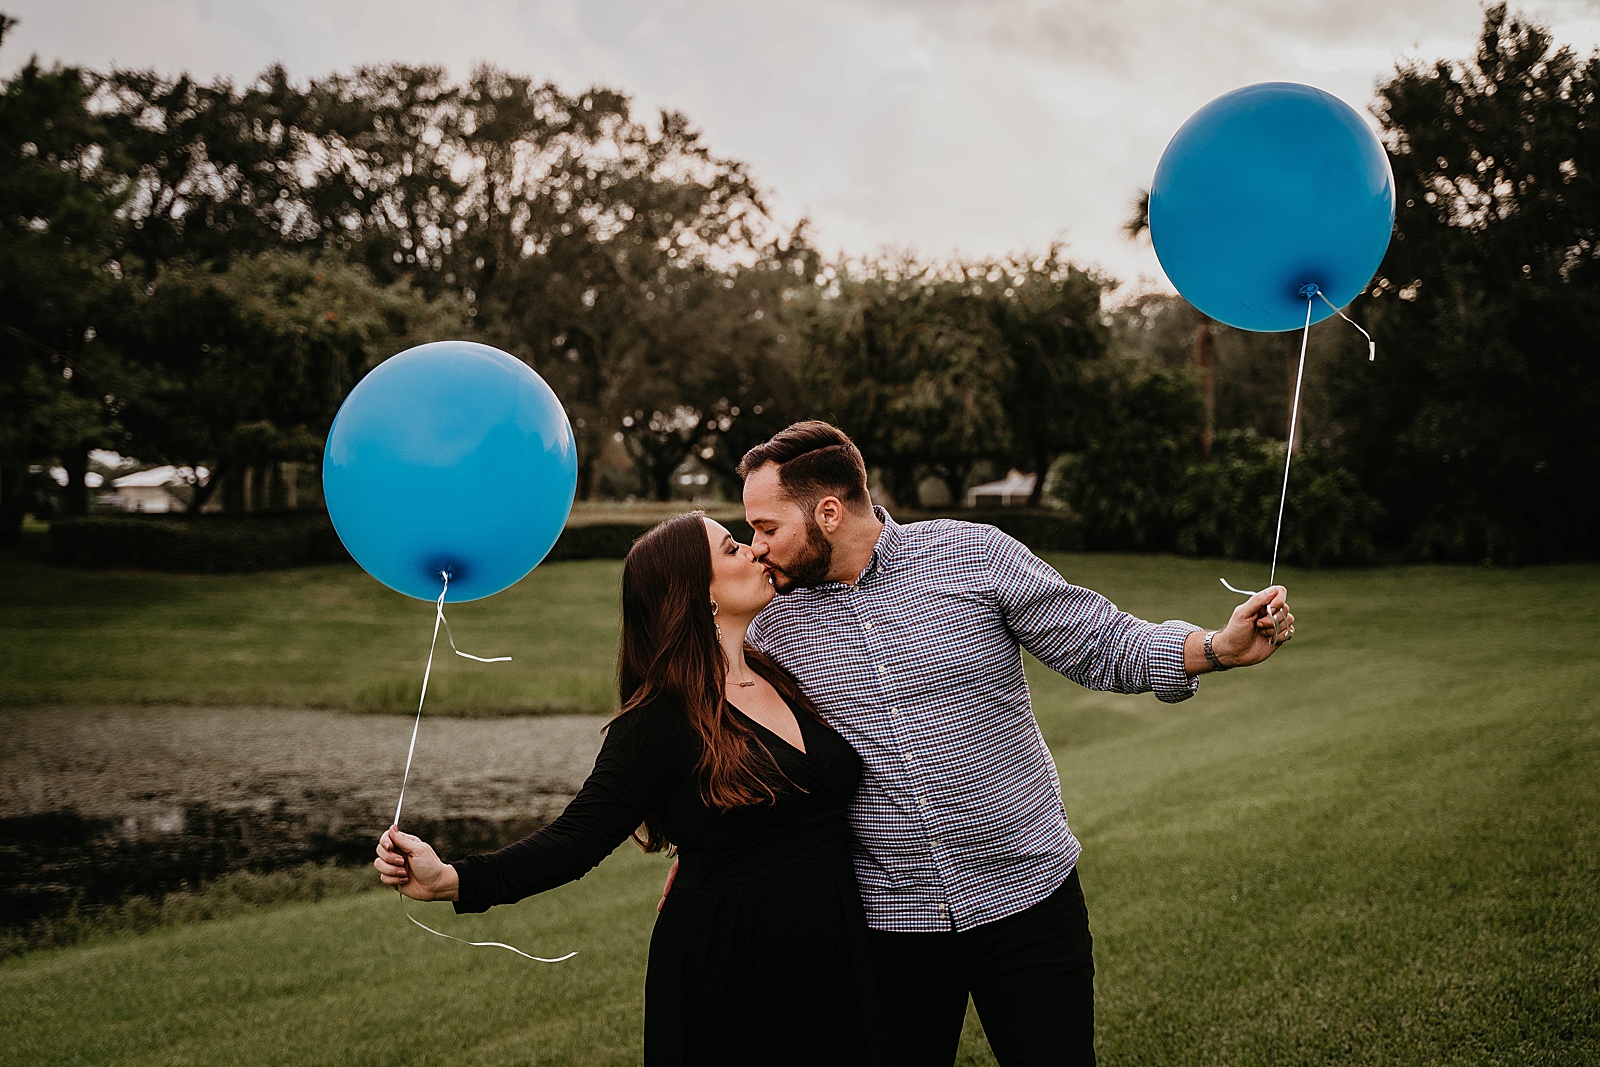 South Florida Gender Reveal Photos by South Florida Family Photographer Krystal Capone Photography